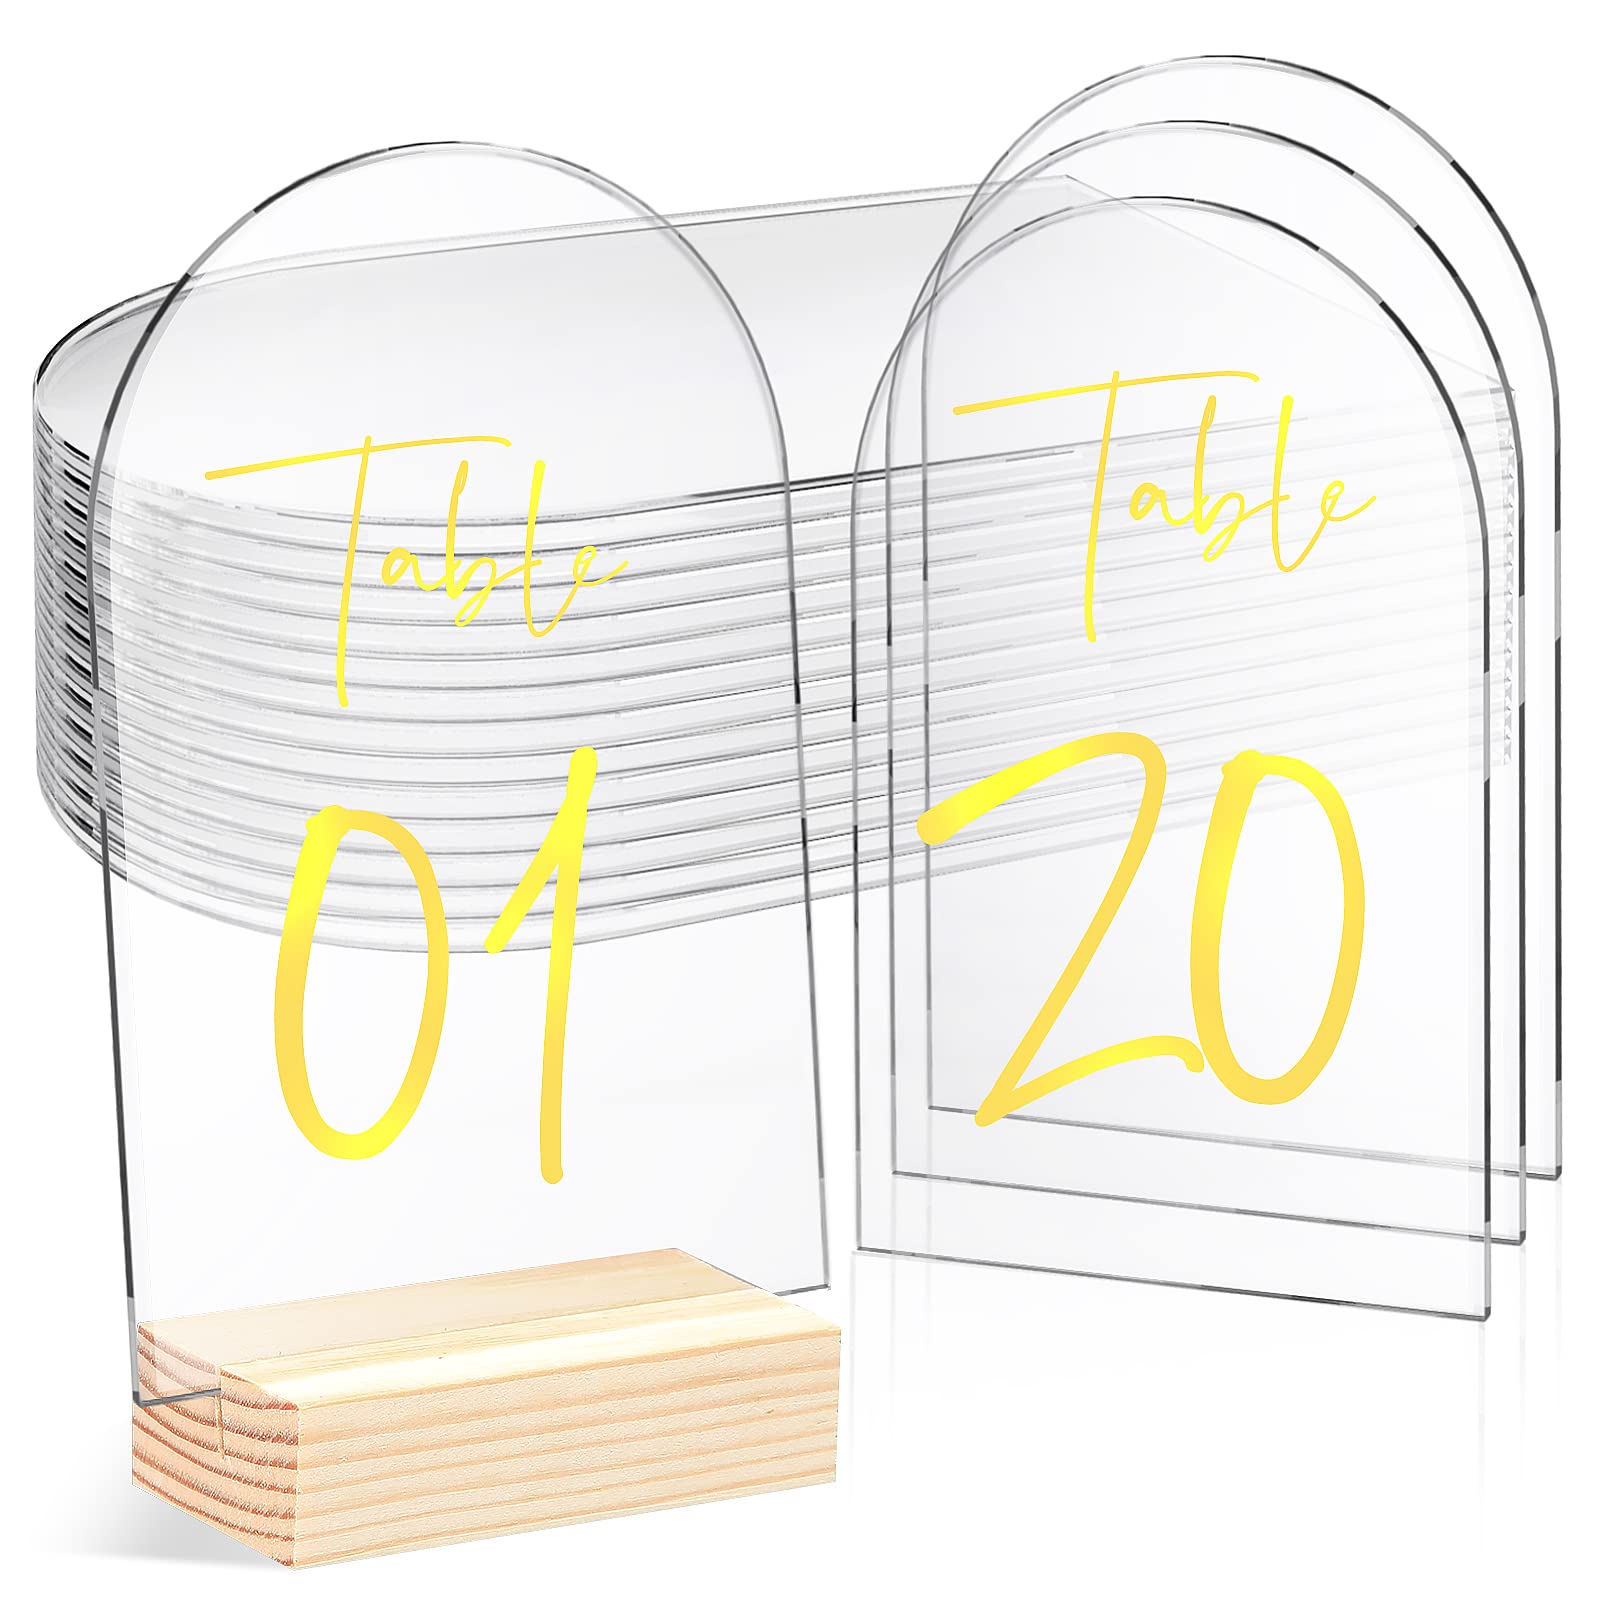 20 Packs 4 x 6 Inch Wedding Clear Arch Acrylic Sign DIY Round Top Acrylic Sheet Arched Acrylic Blanks Table Numbers Modern Wedding Signs Events Parties Centerpieces Decor for Bar List Menu Sign